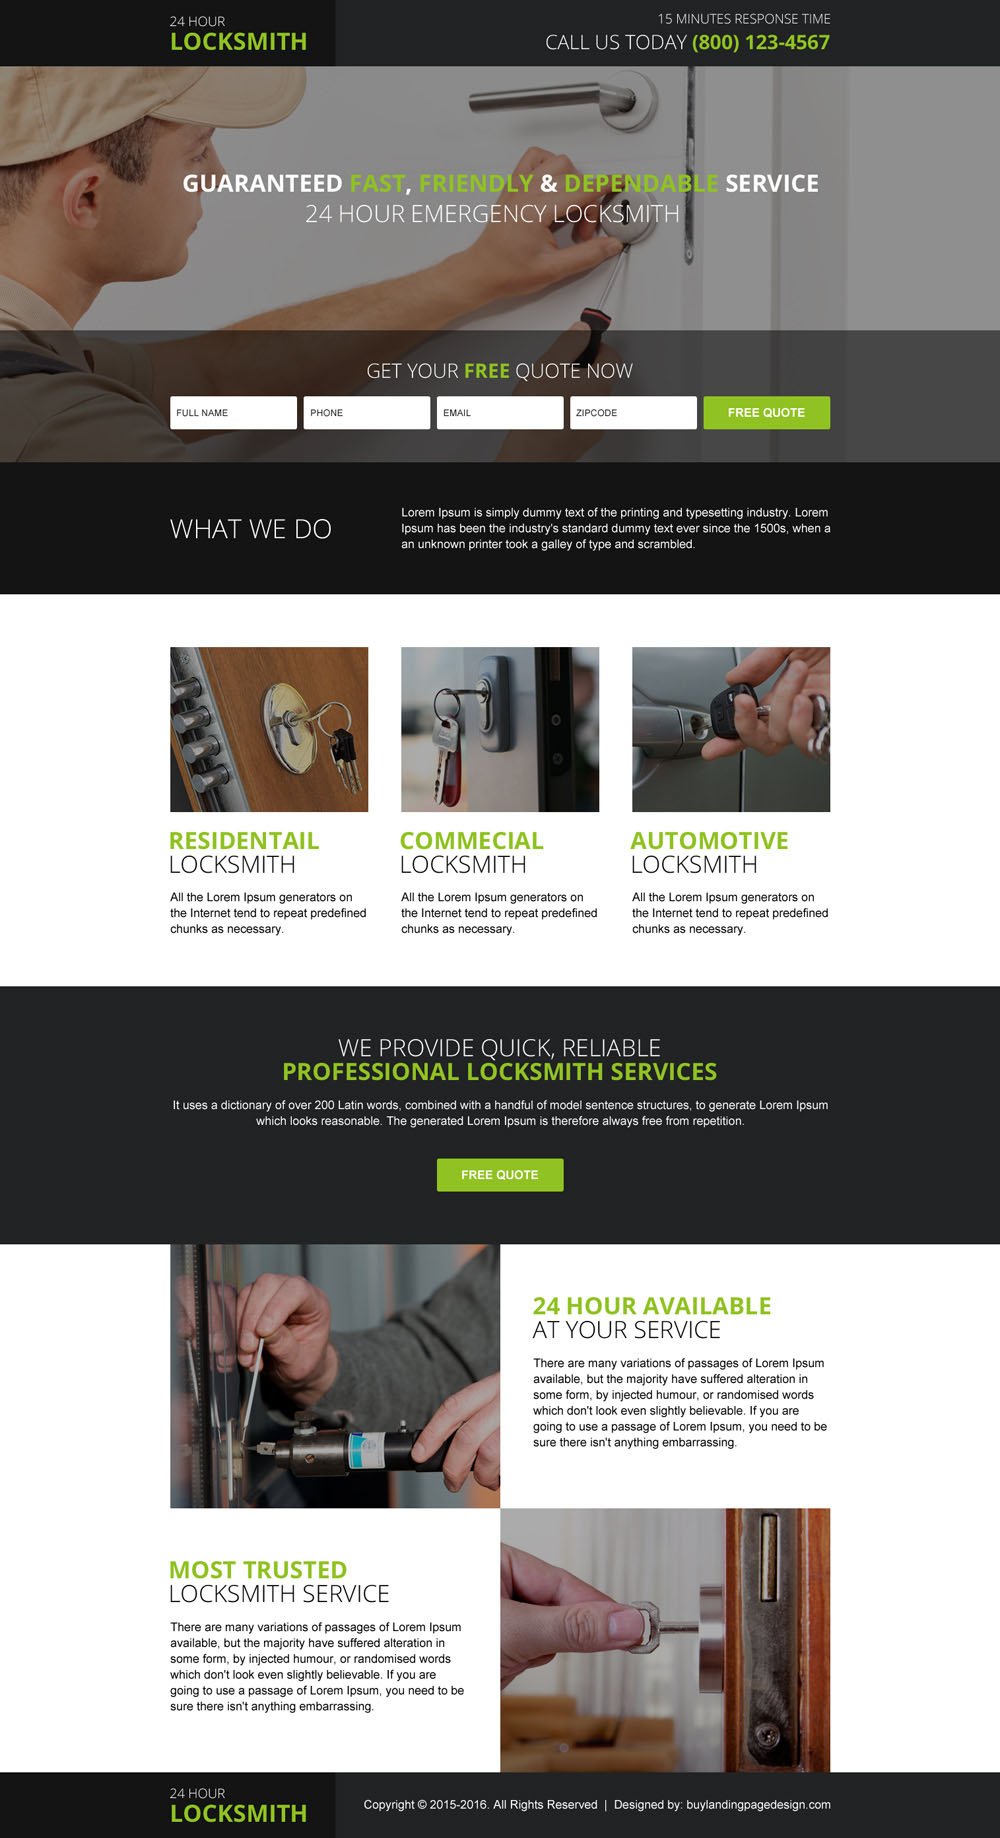 residential-commercial-and-automotive-locksmith-free-quote-lead-gen-landing-page-005